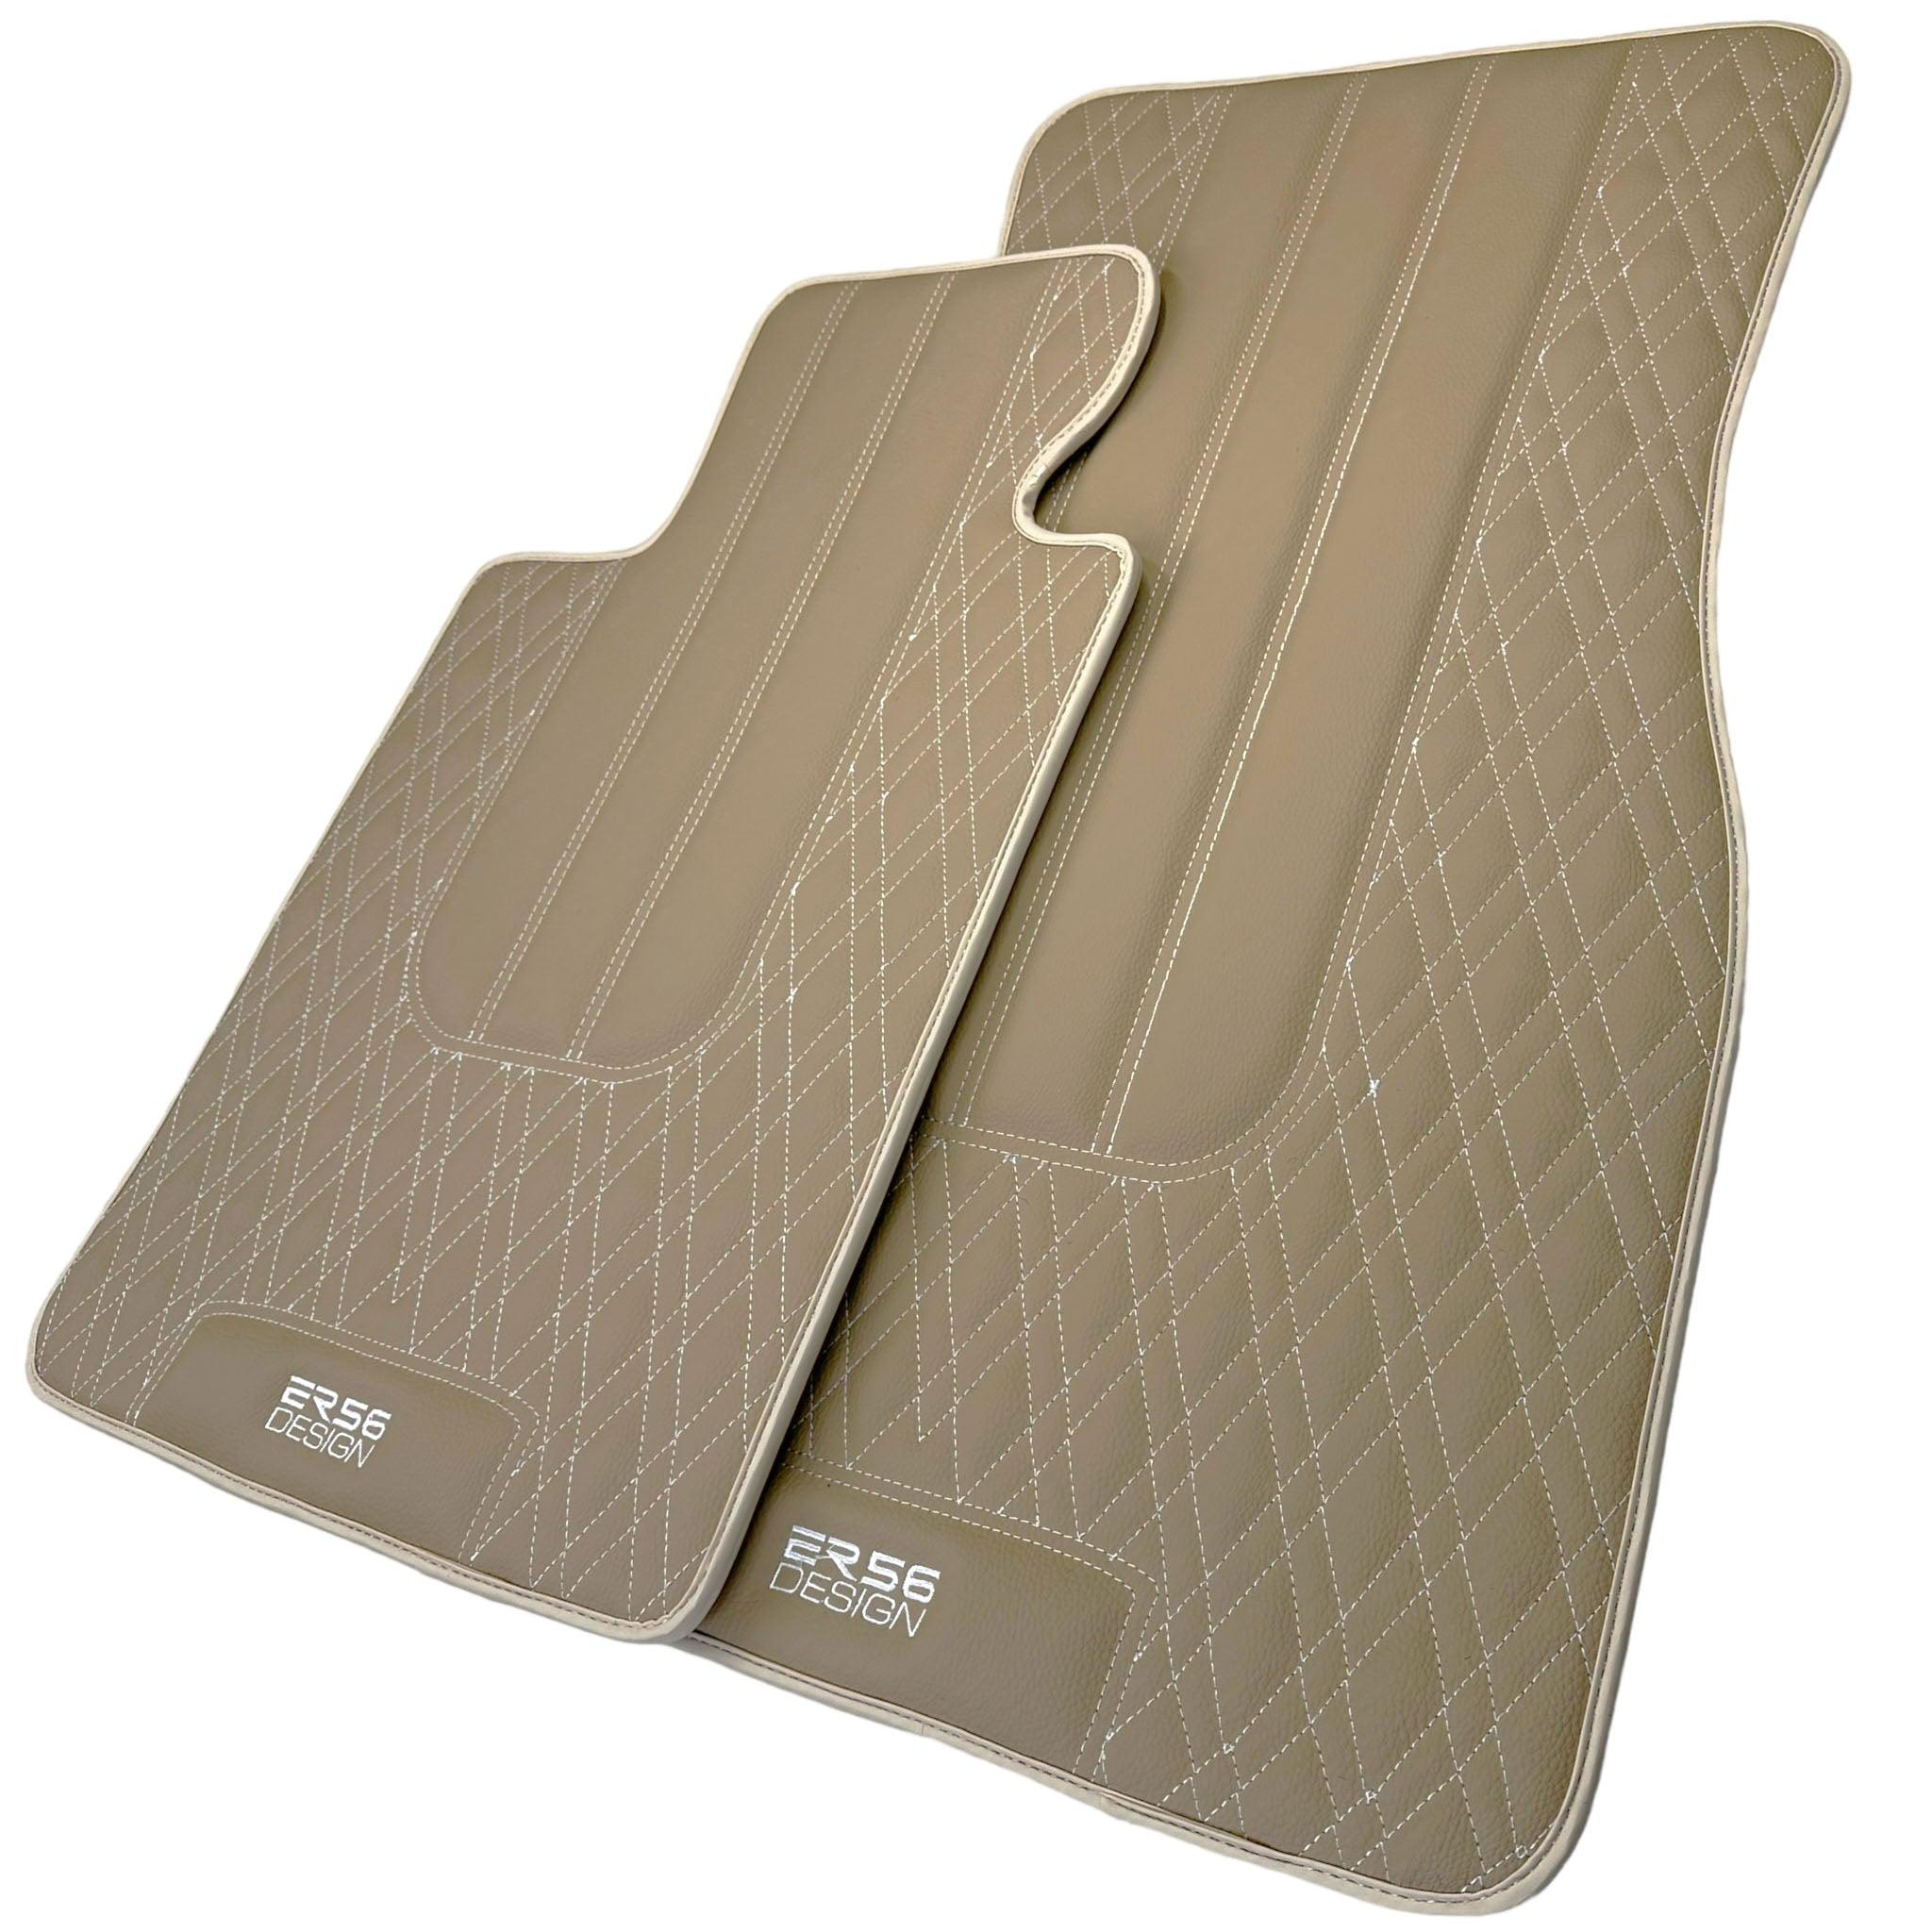 Beige Leather Floor Mats For BMW 4 Series G26 Gran Coupe